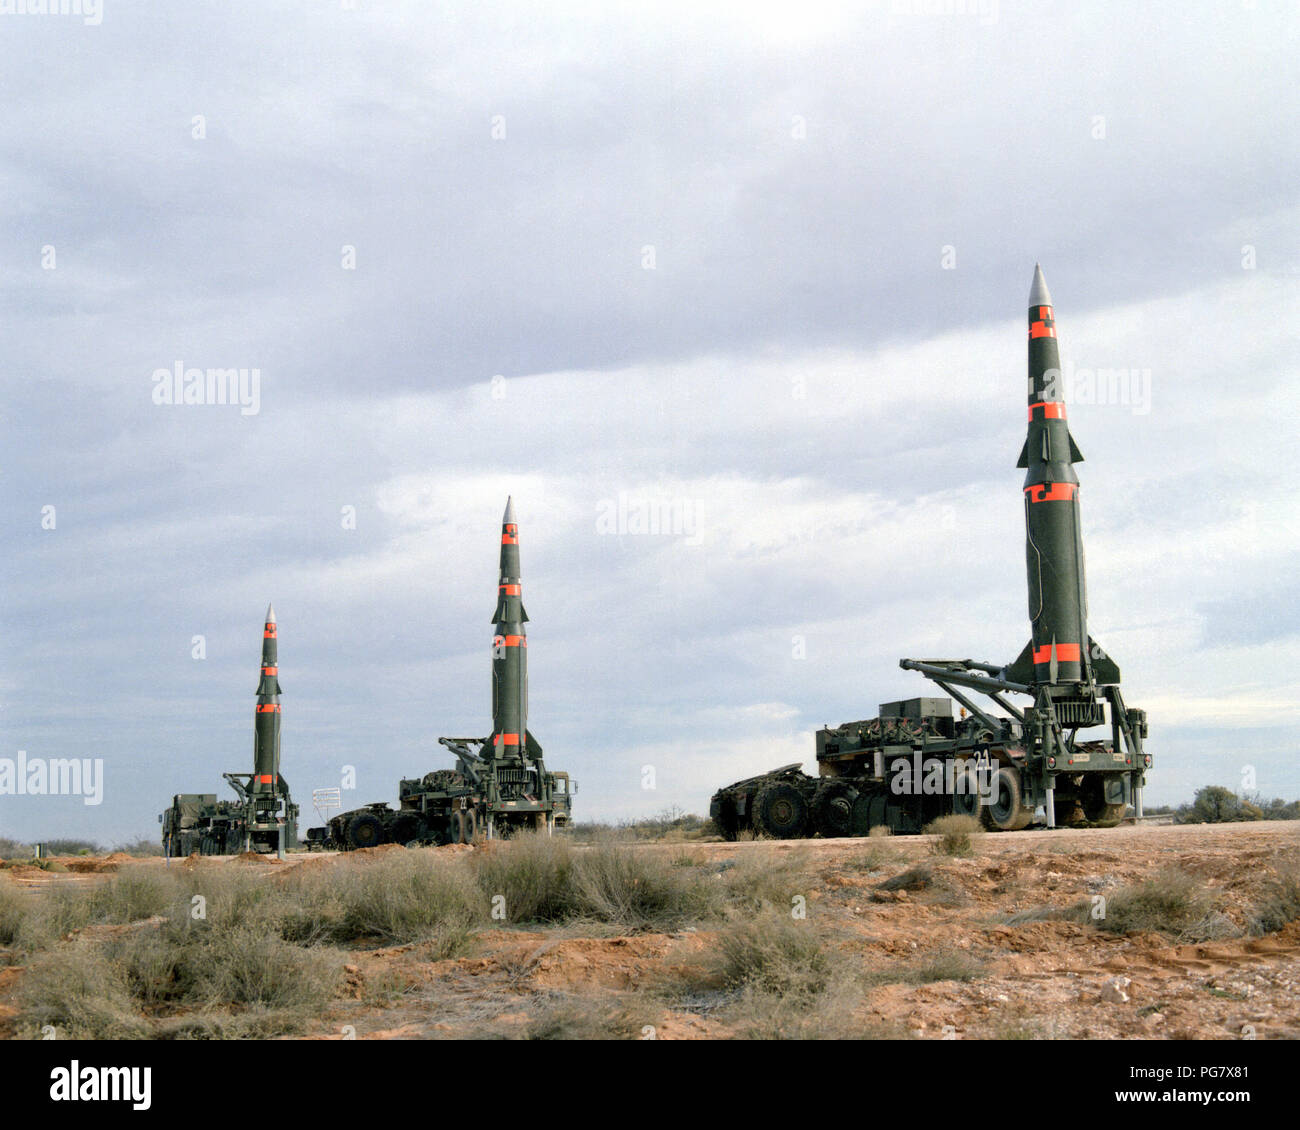 Several Pershing II missiles are prepared for launching at the McGregor Range. Stock Photo